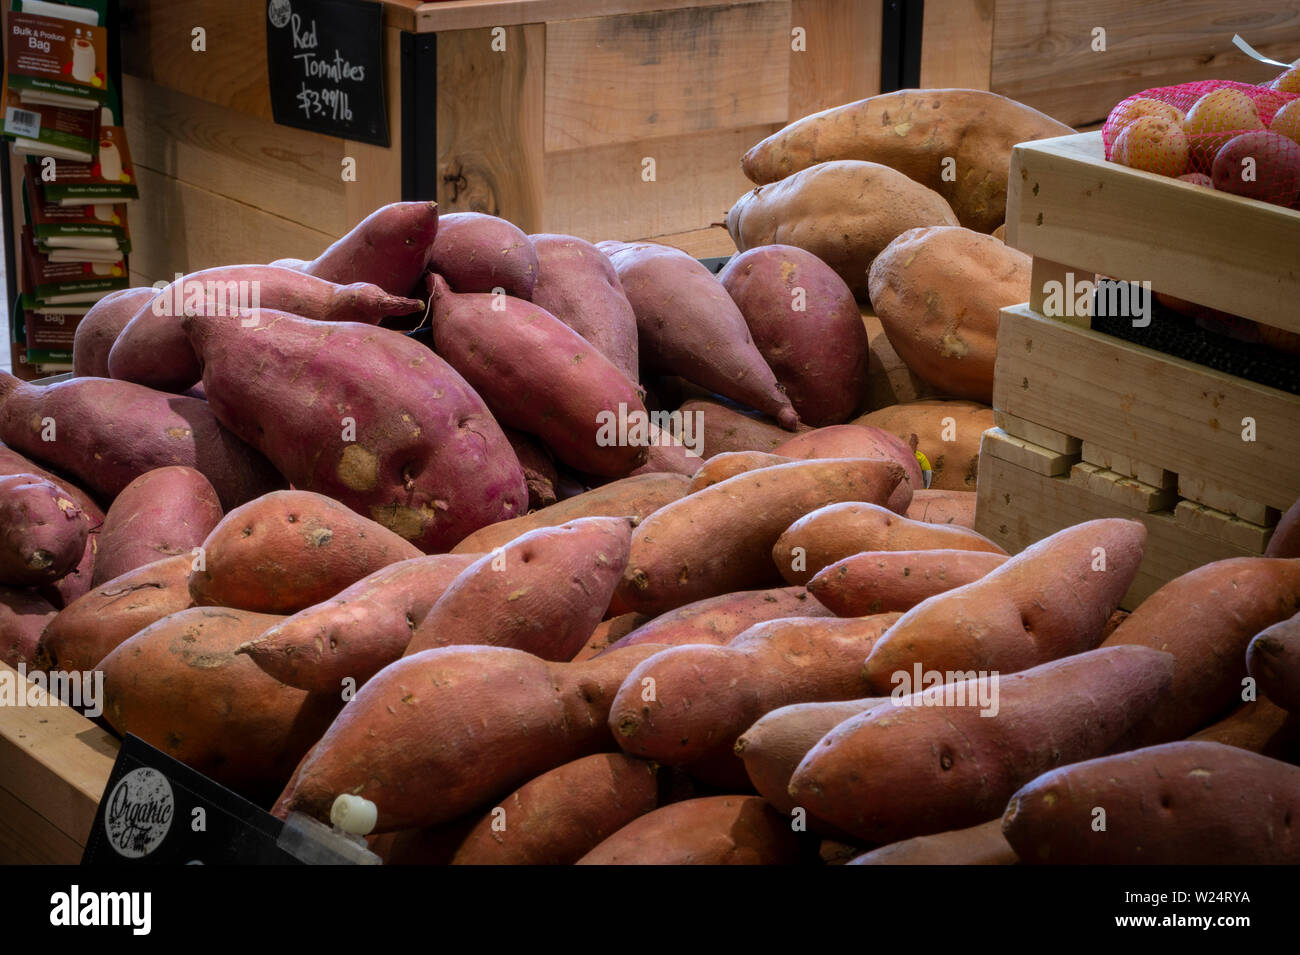 Sweet Potatoes & Yams For Sale In Produce Aisle in Grocery Store, USA Stock Photo